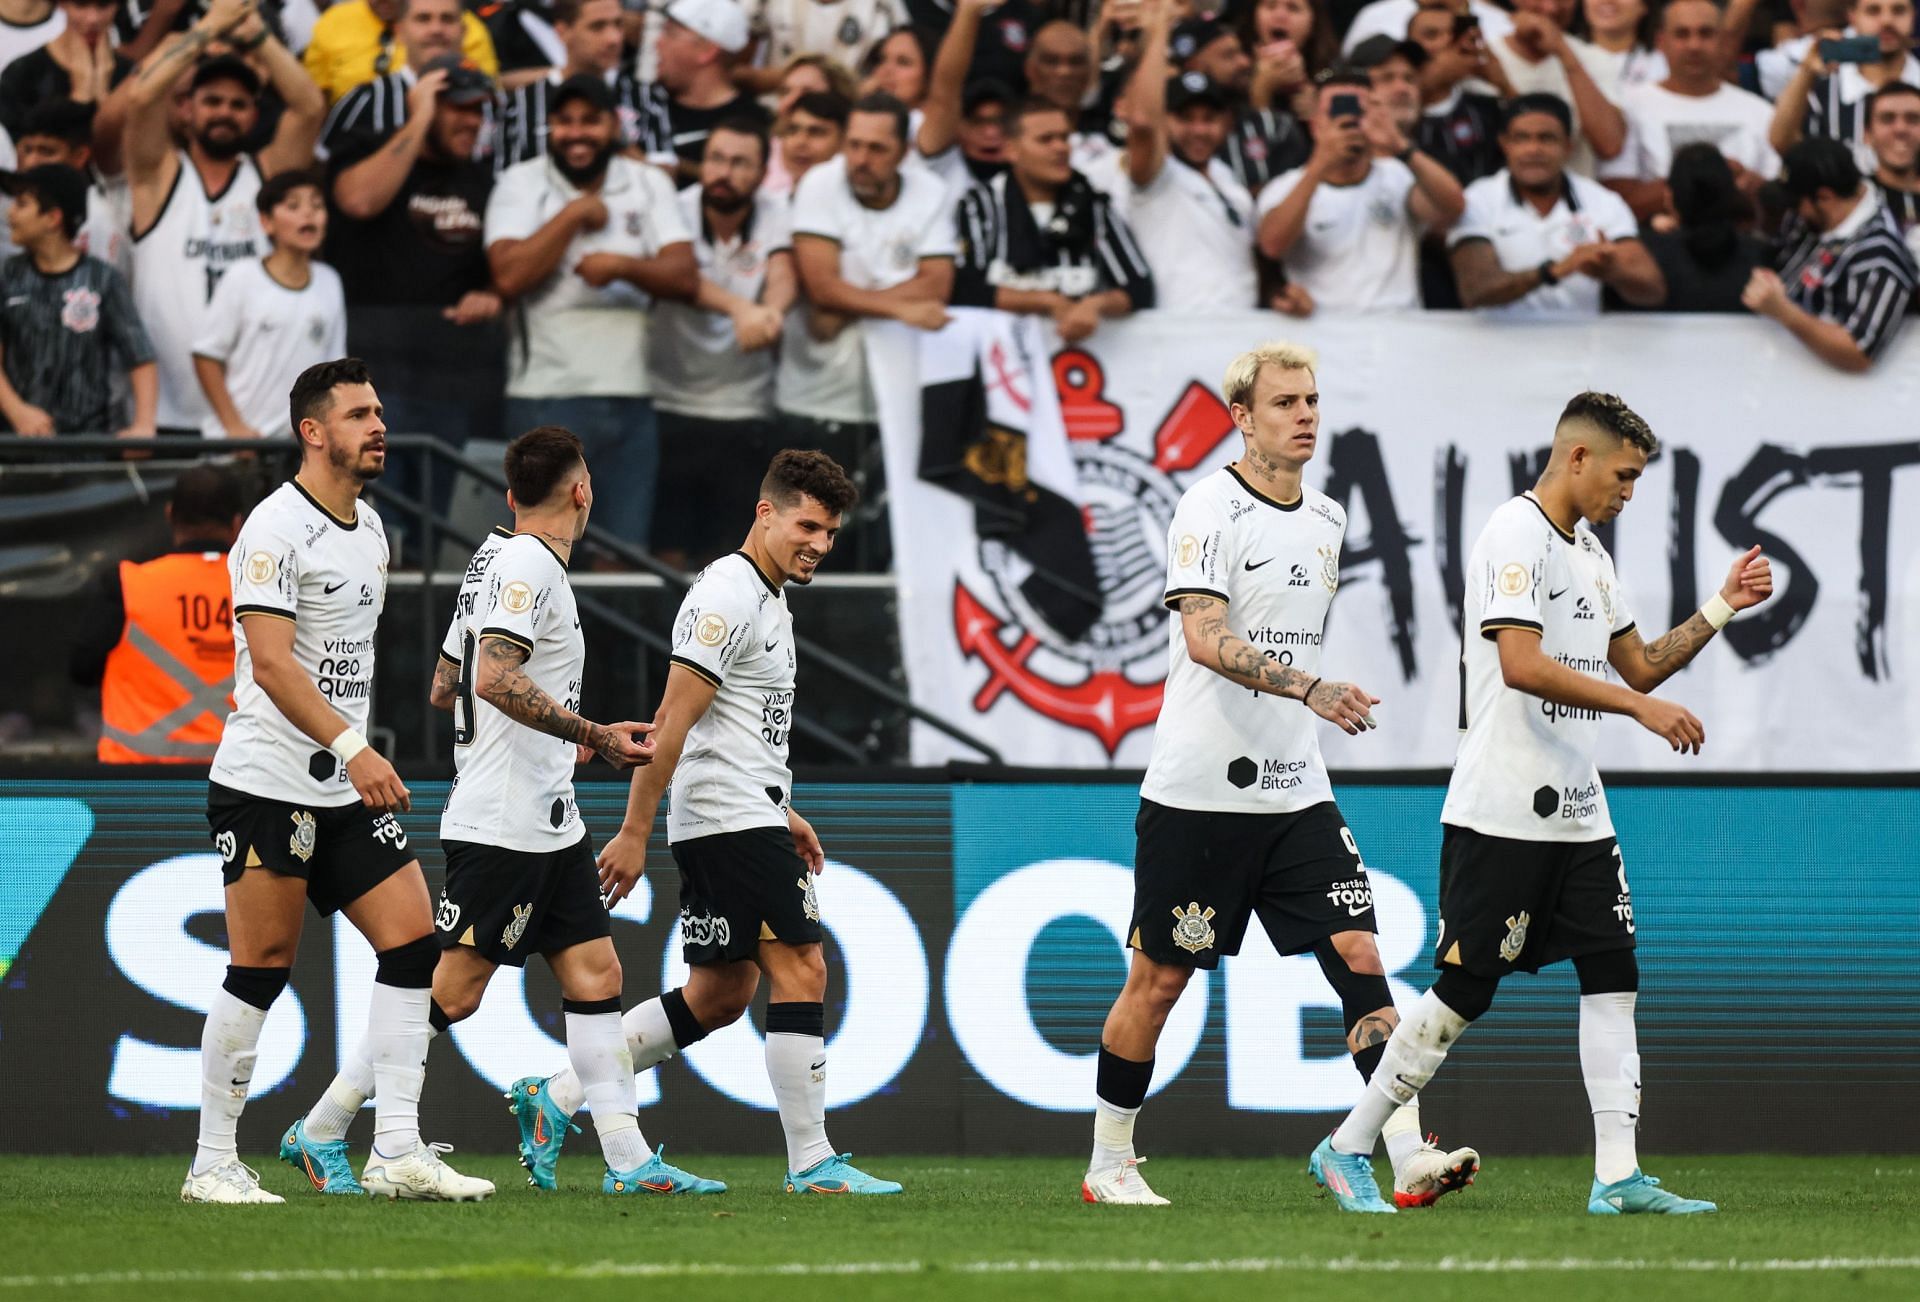 Corinthians will be confident of winning the game